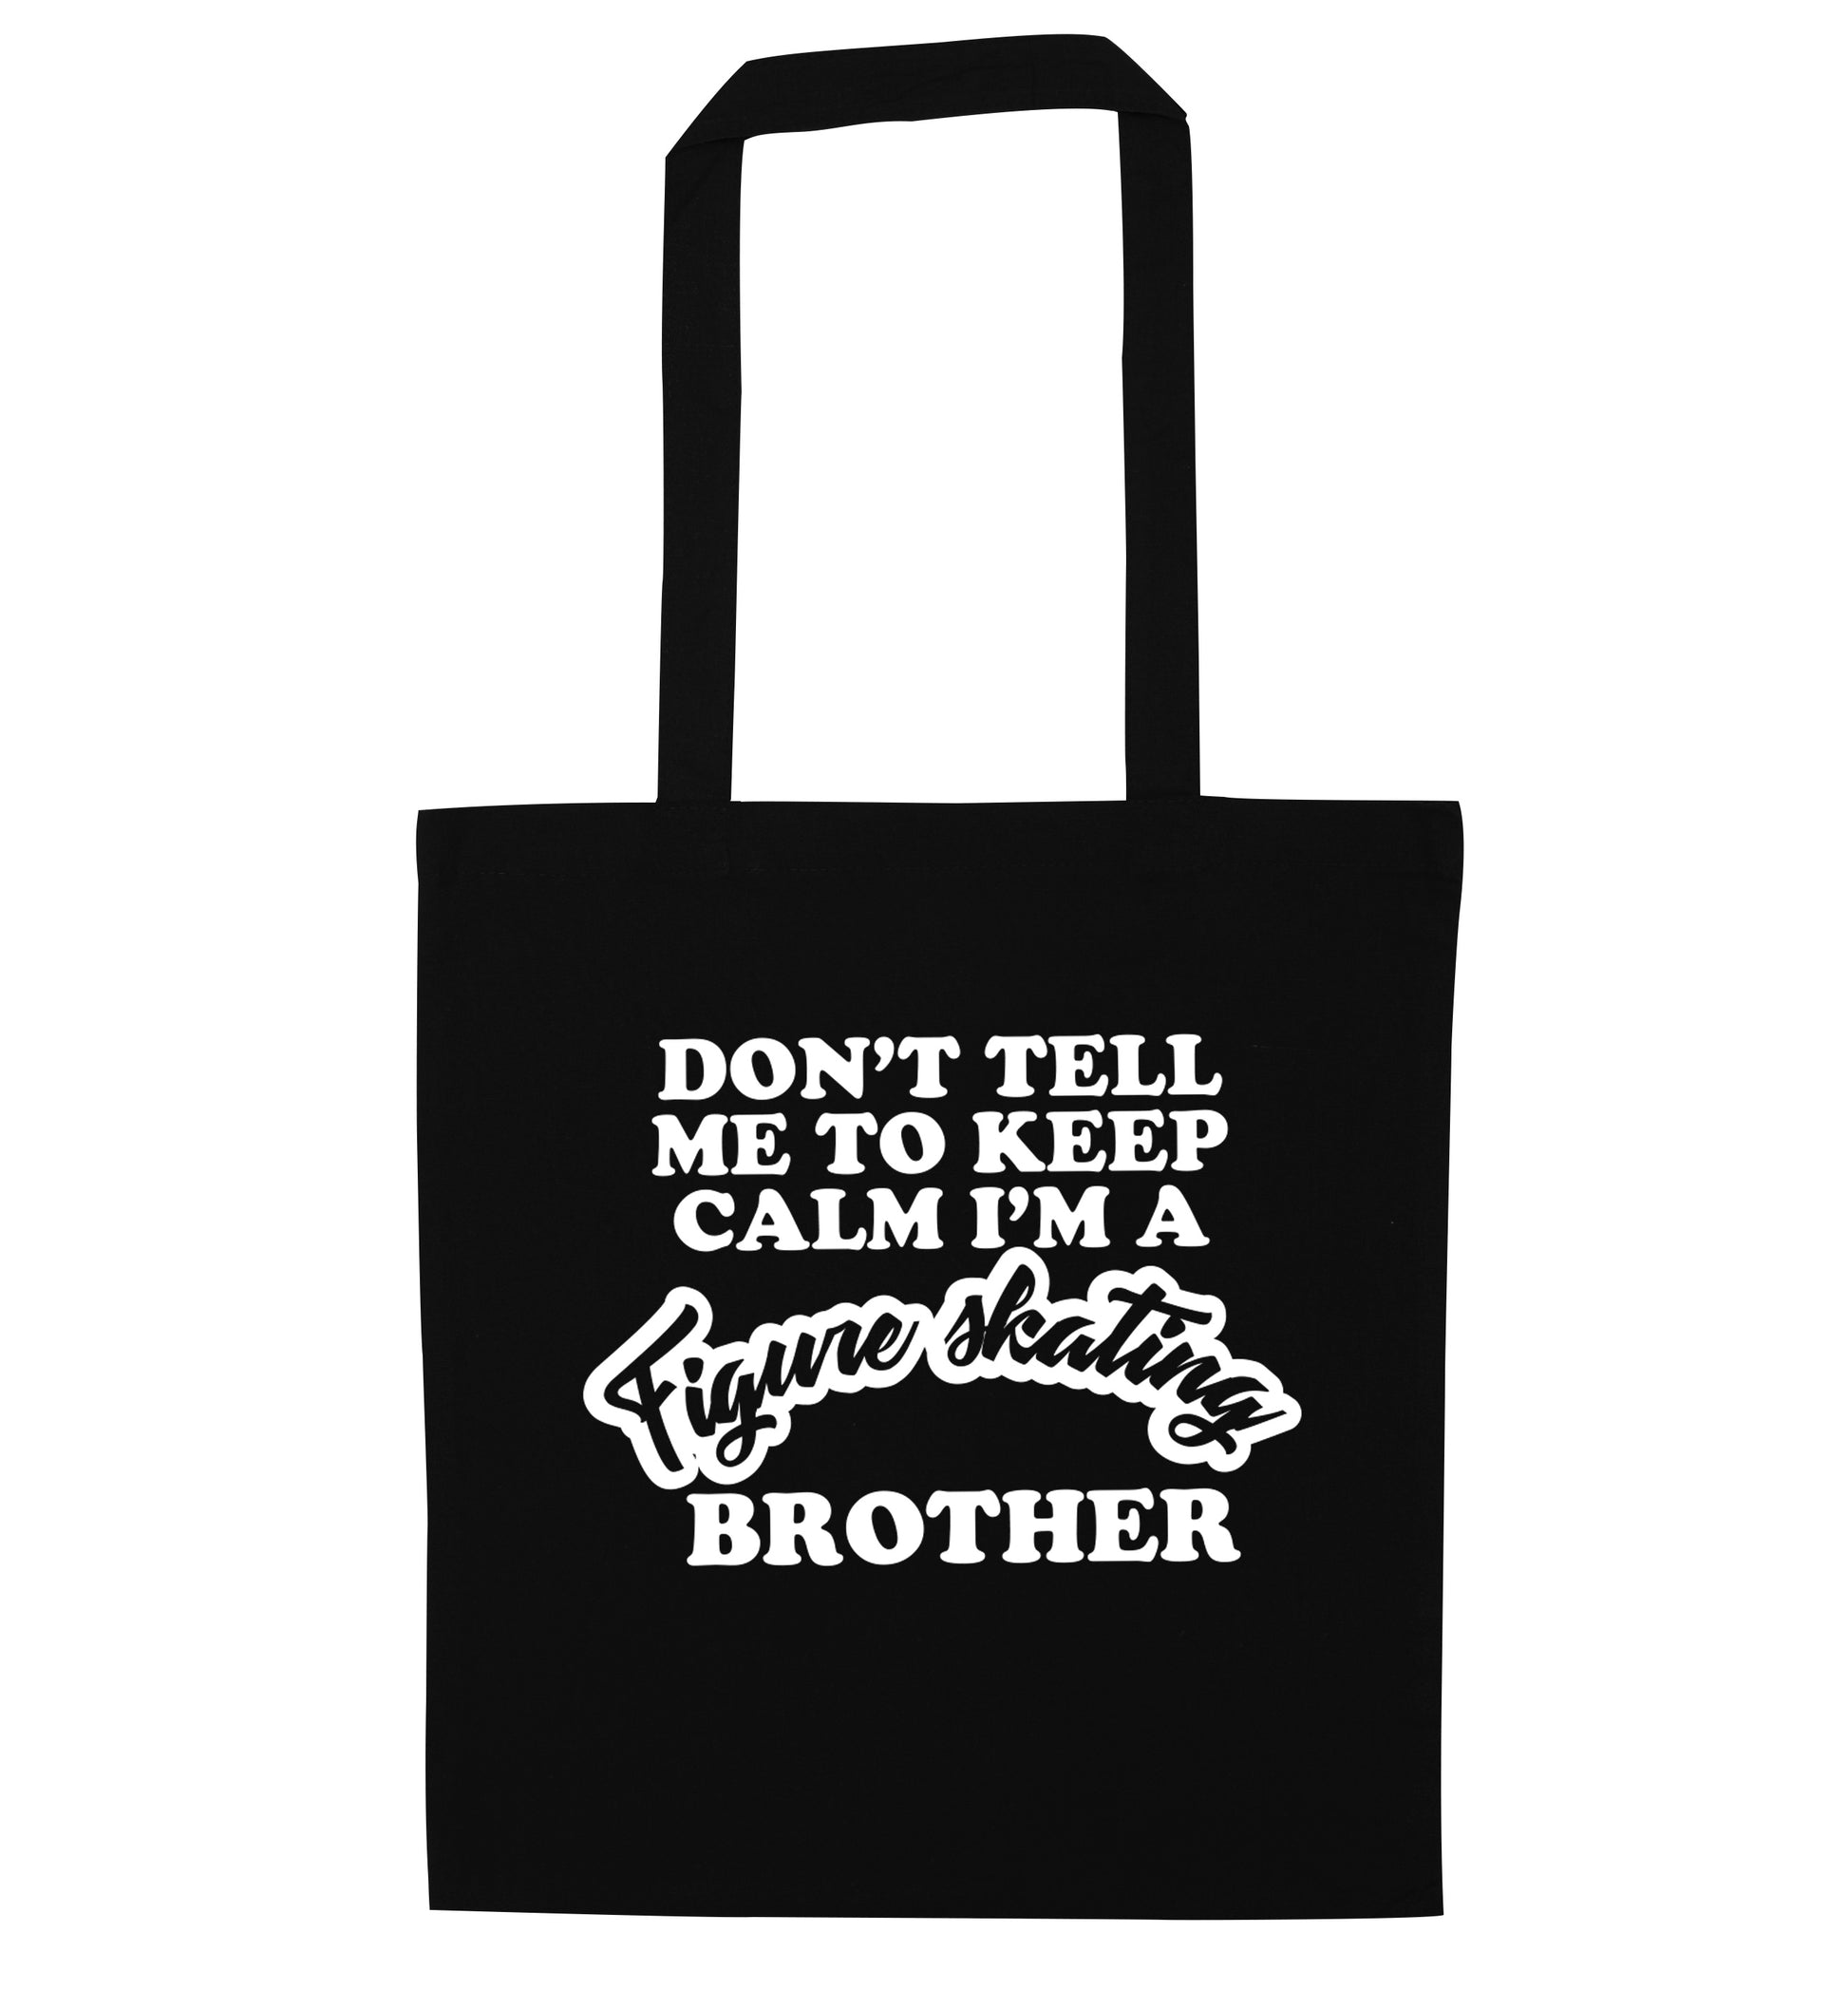 Don't tell me to keep calm I'm a figure skating brother black tote bag